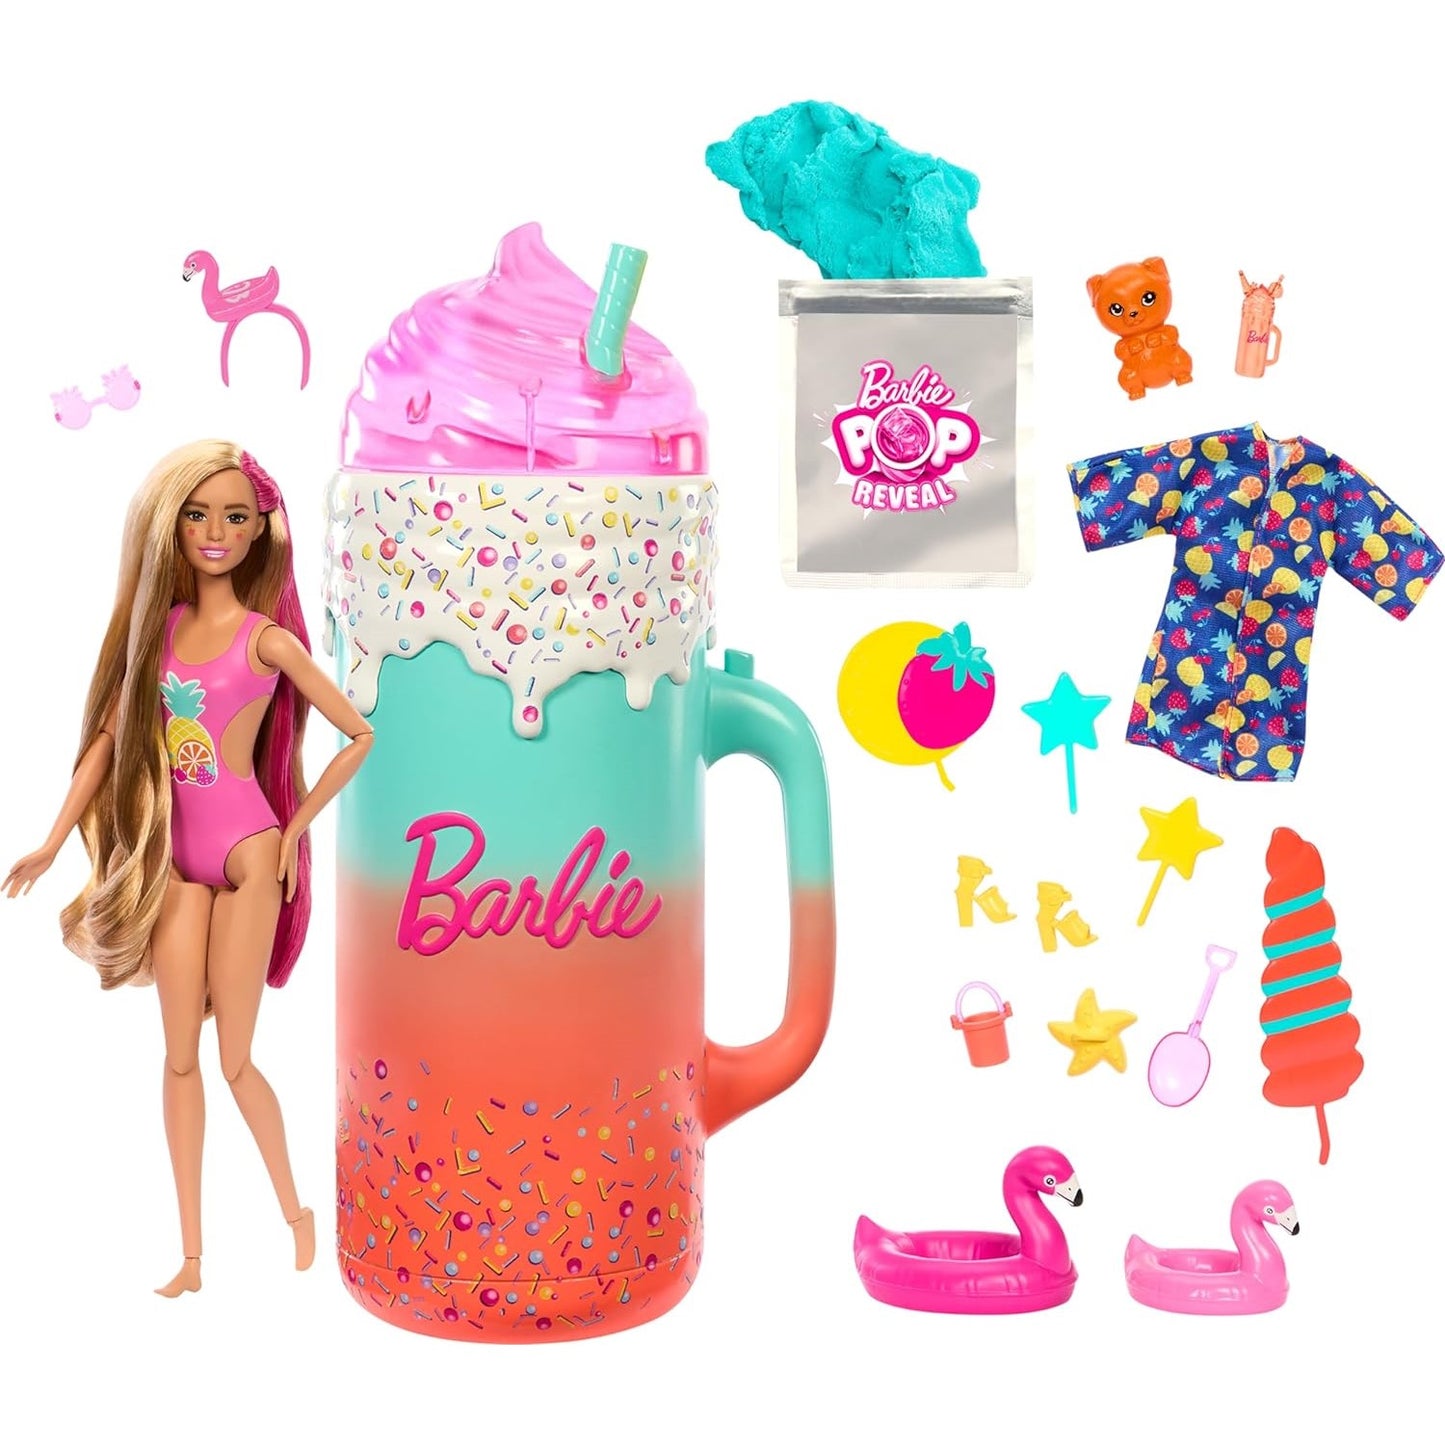 Barbie - Reveal - Pop Reveal Fruit Series Giftset - Tropical Smoothie